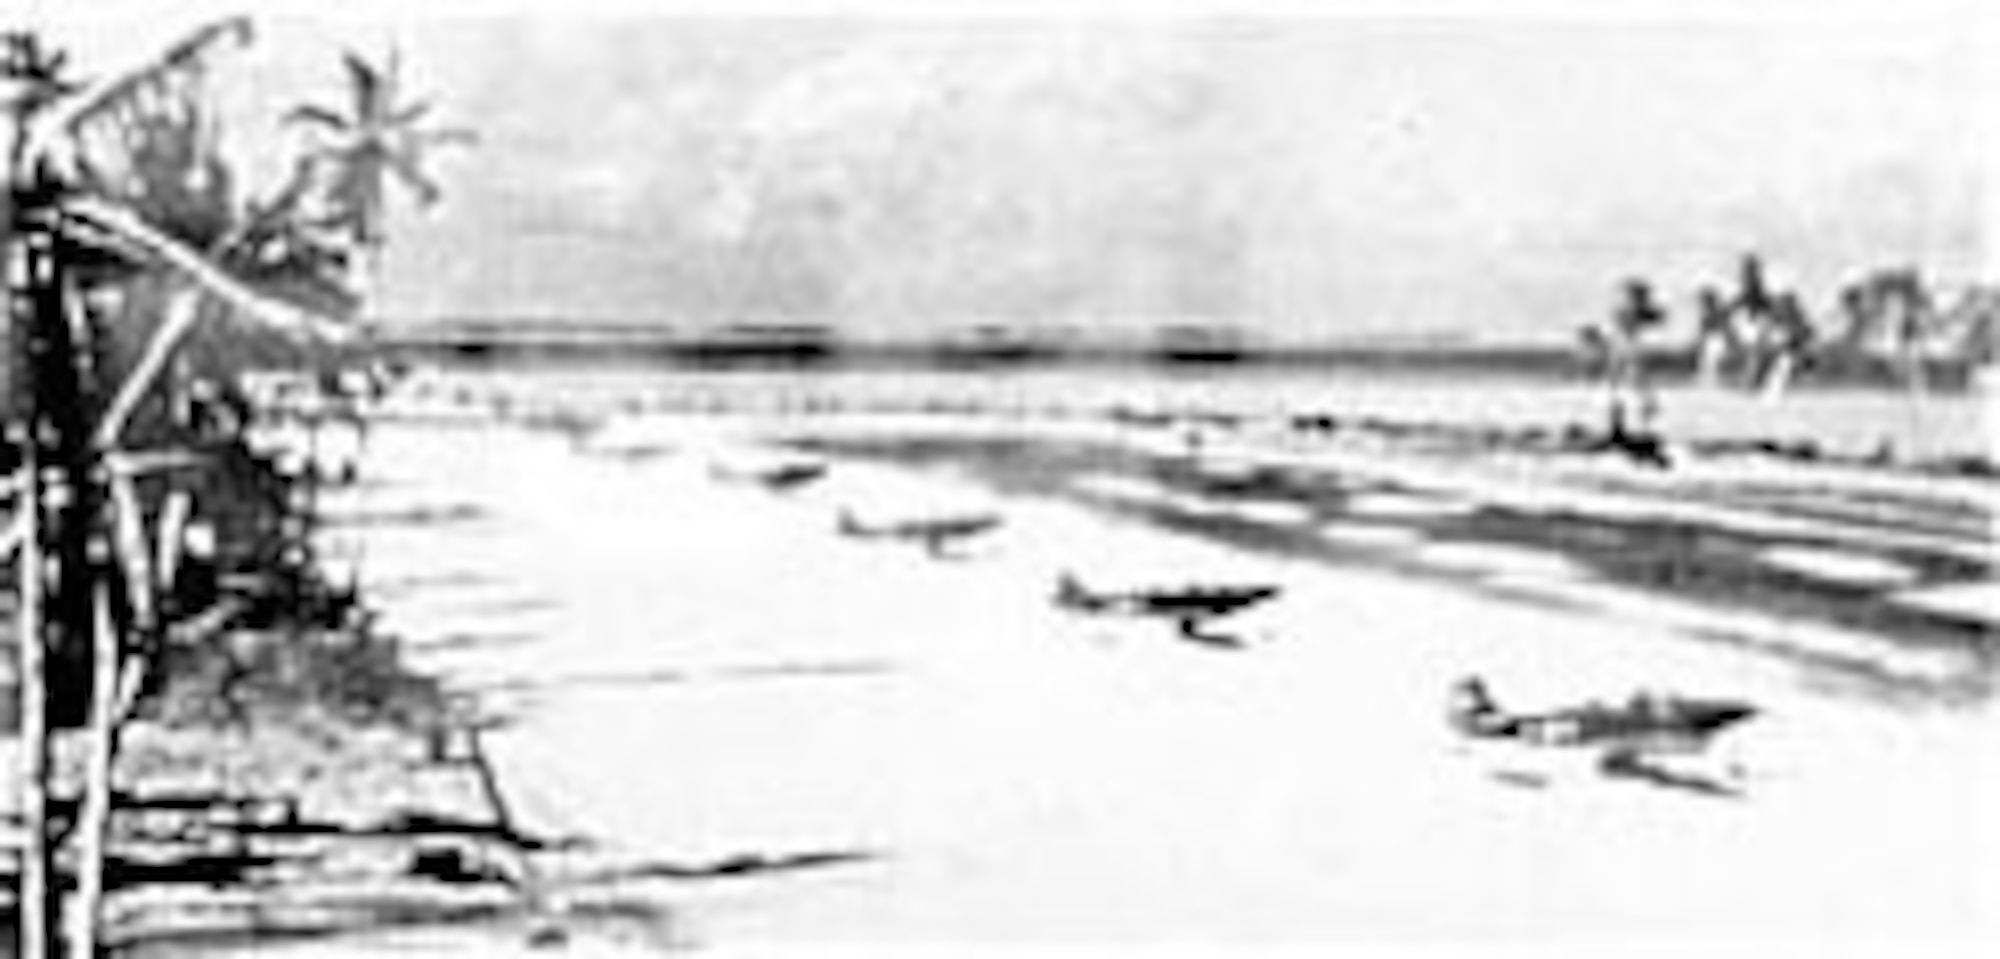 P-39 Airacobras on Makin Island in the Gilberts in December 1943, just weeks after U.S. Army forces had seized the island. (U.S. Air Force photo)